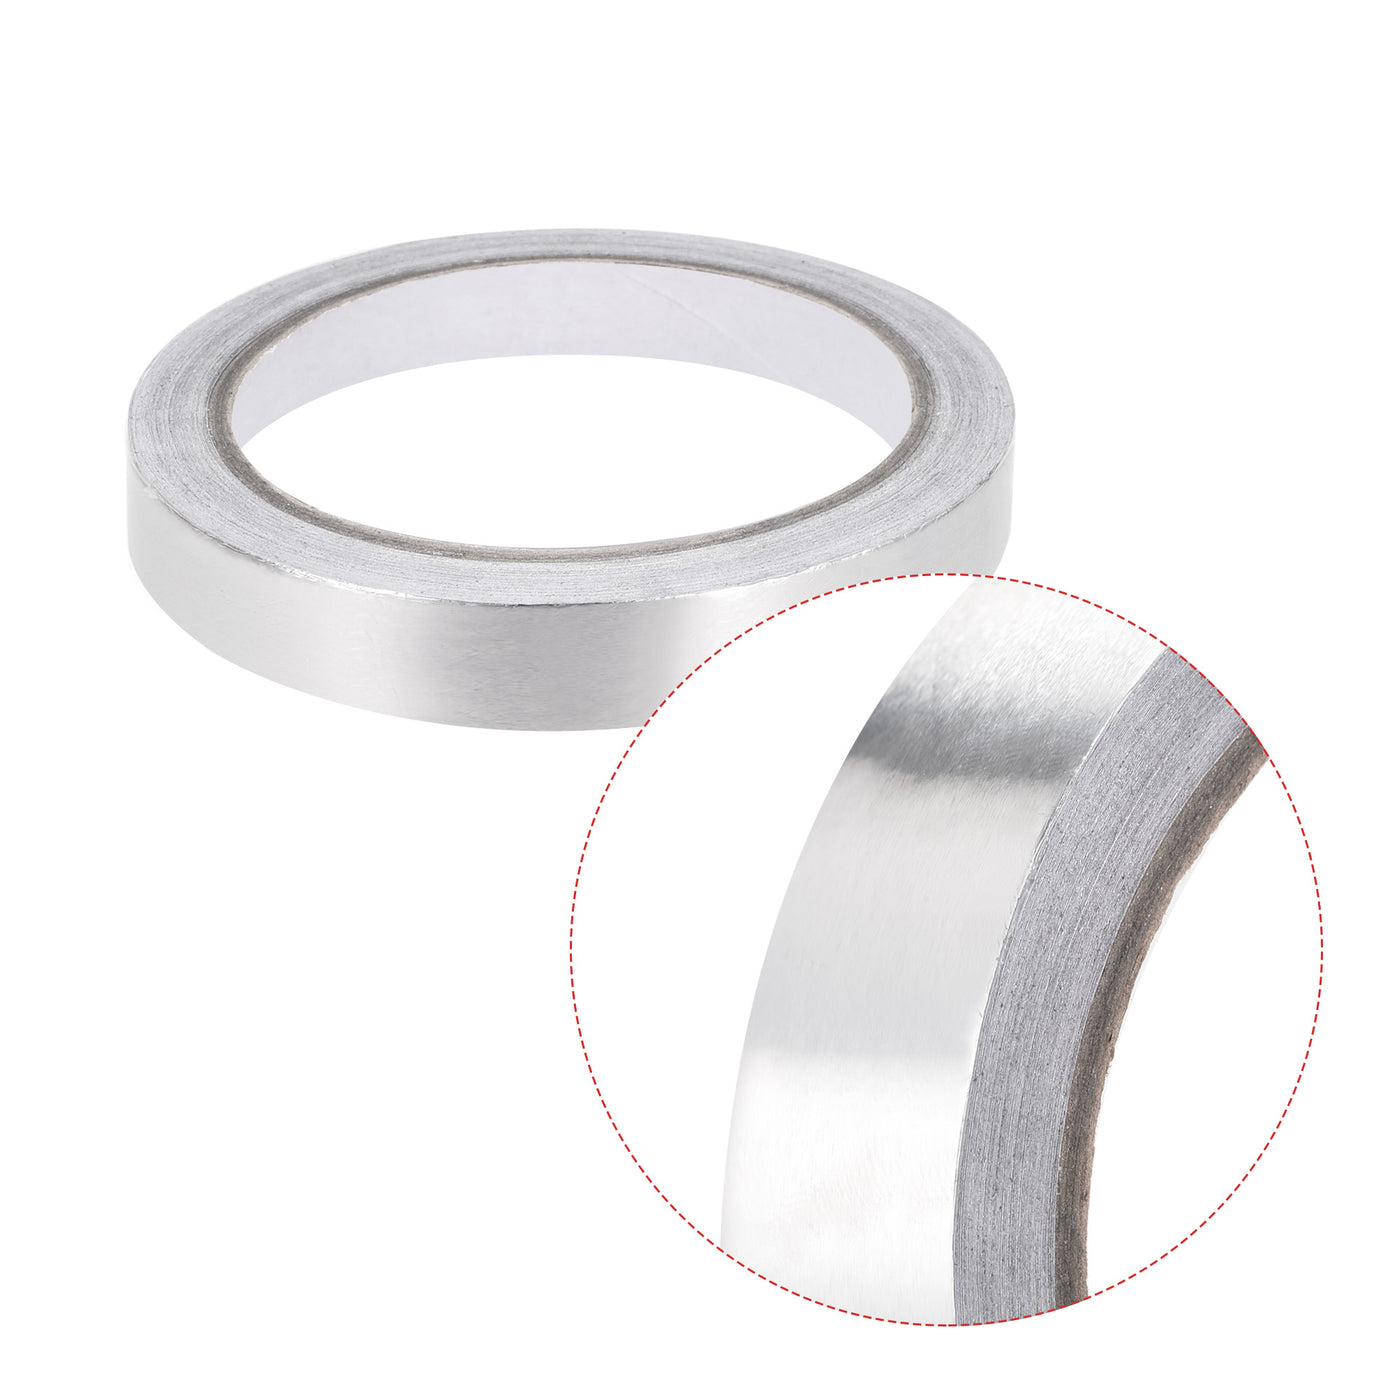 uxcell Uxcell 10mm/20mm Aluminum Foil Tape High Temperature Tape for HVAC, Sealing, Patching Hot Cold Air Ducts Single Sided Adhesive Tape 20m/65ft